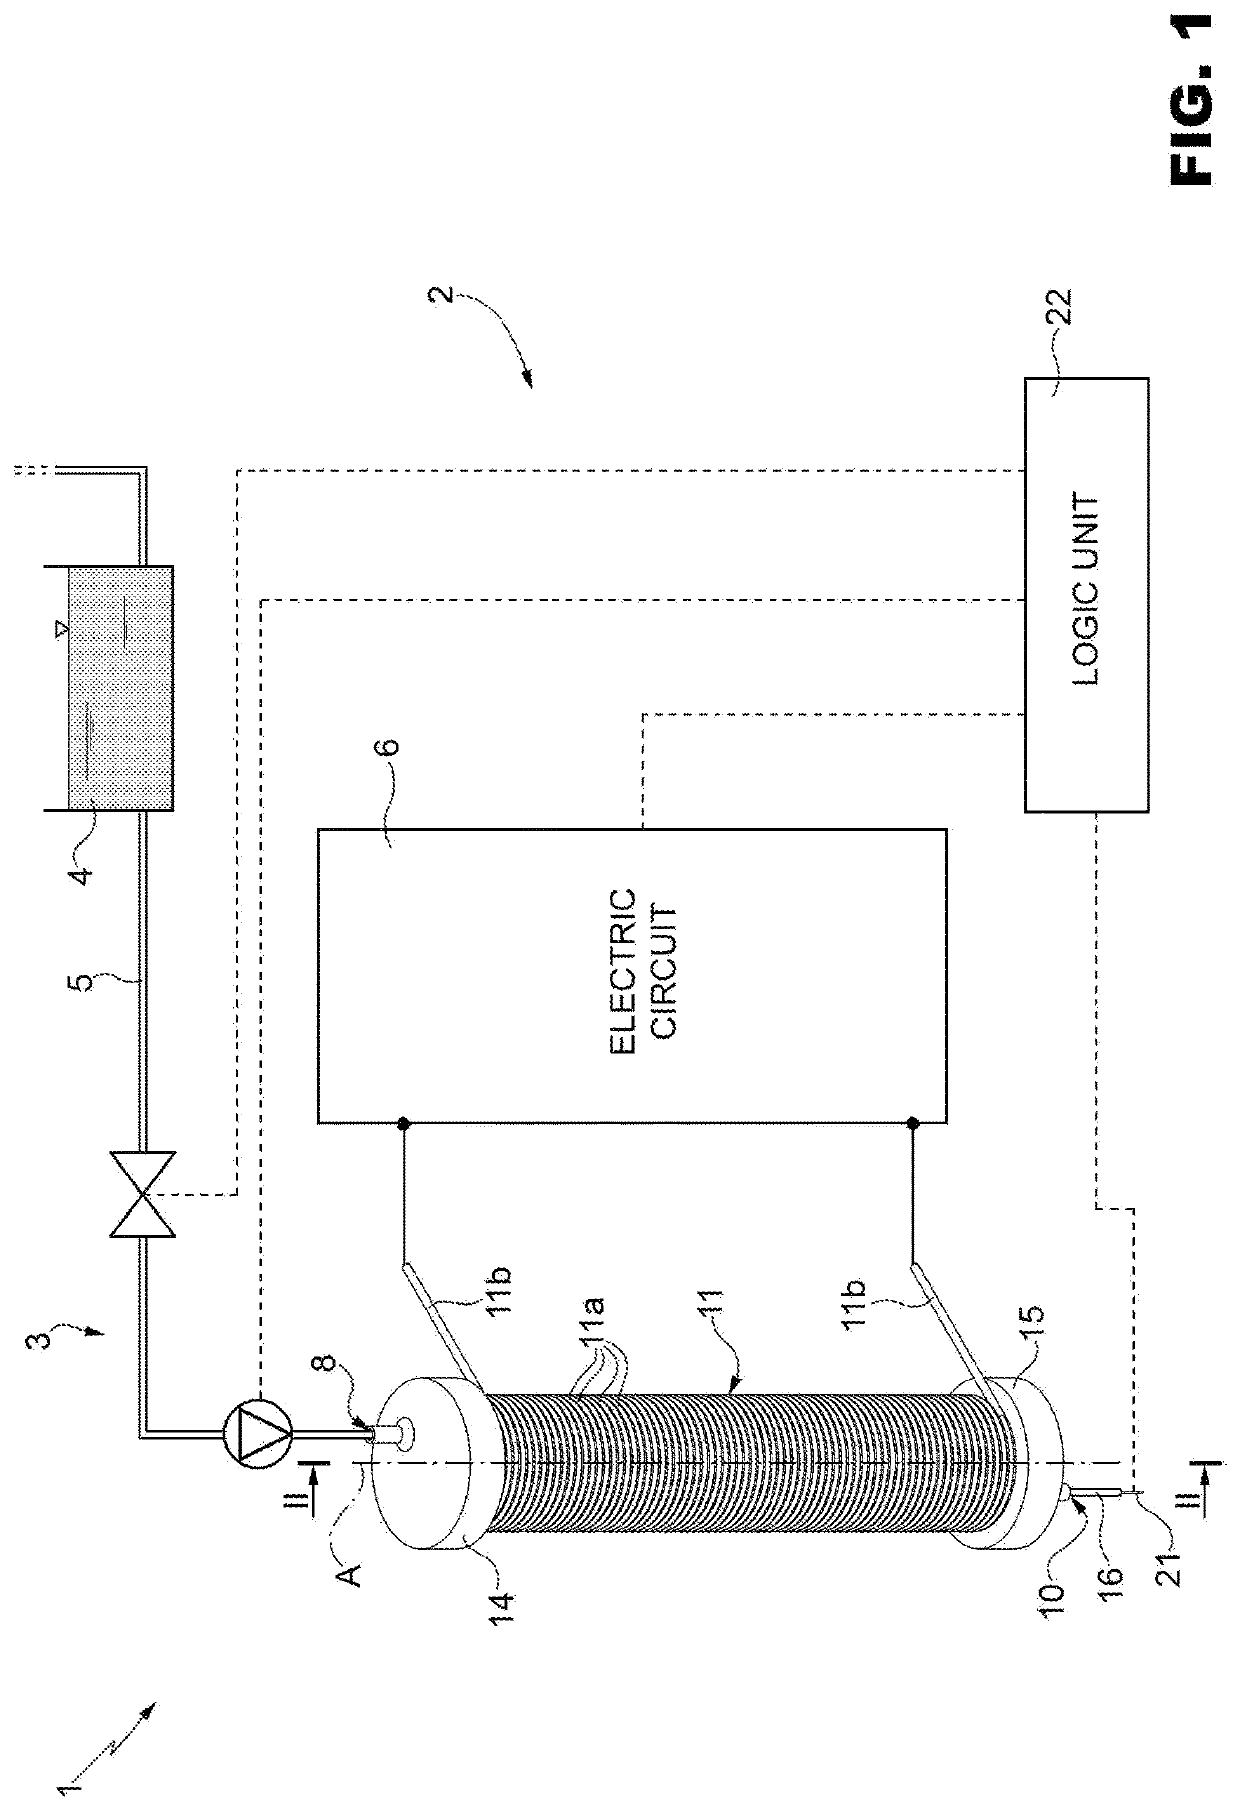 Continuous-flow electromagnetic-induction fluid heater in a beverage vending machine